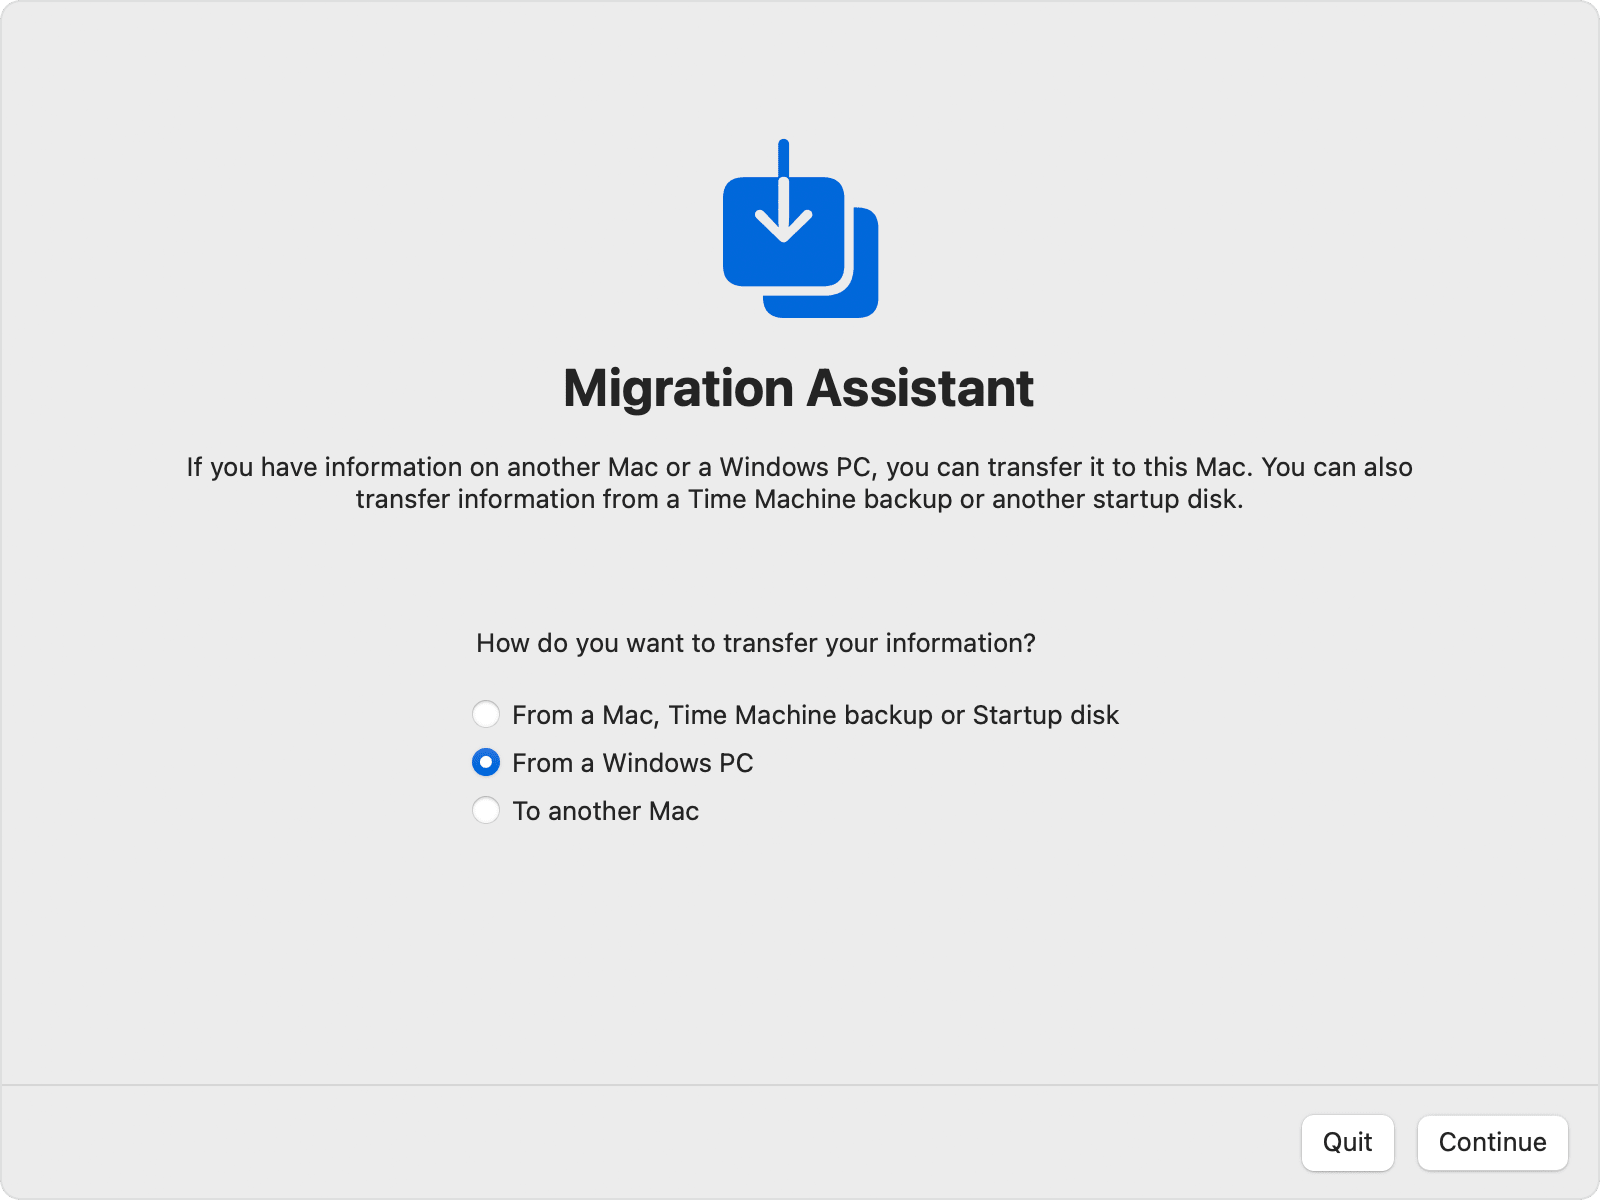 Download migration assistant pc to mac download pdf on ipad where does it go